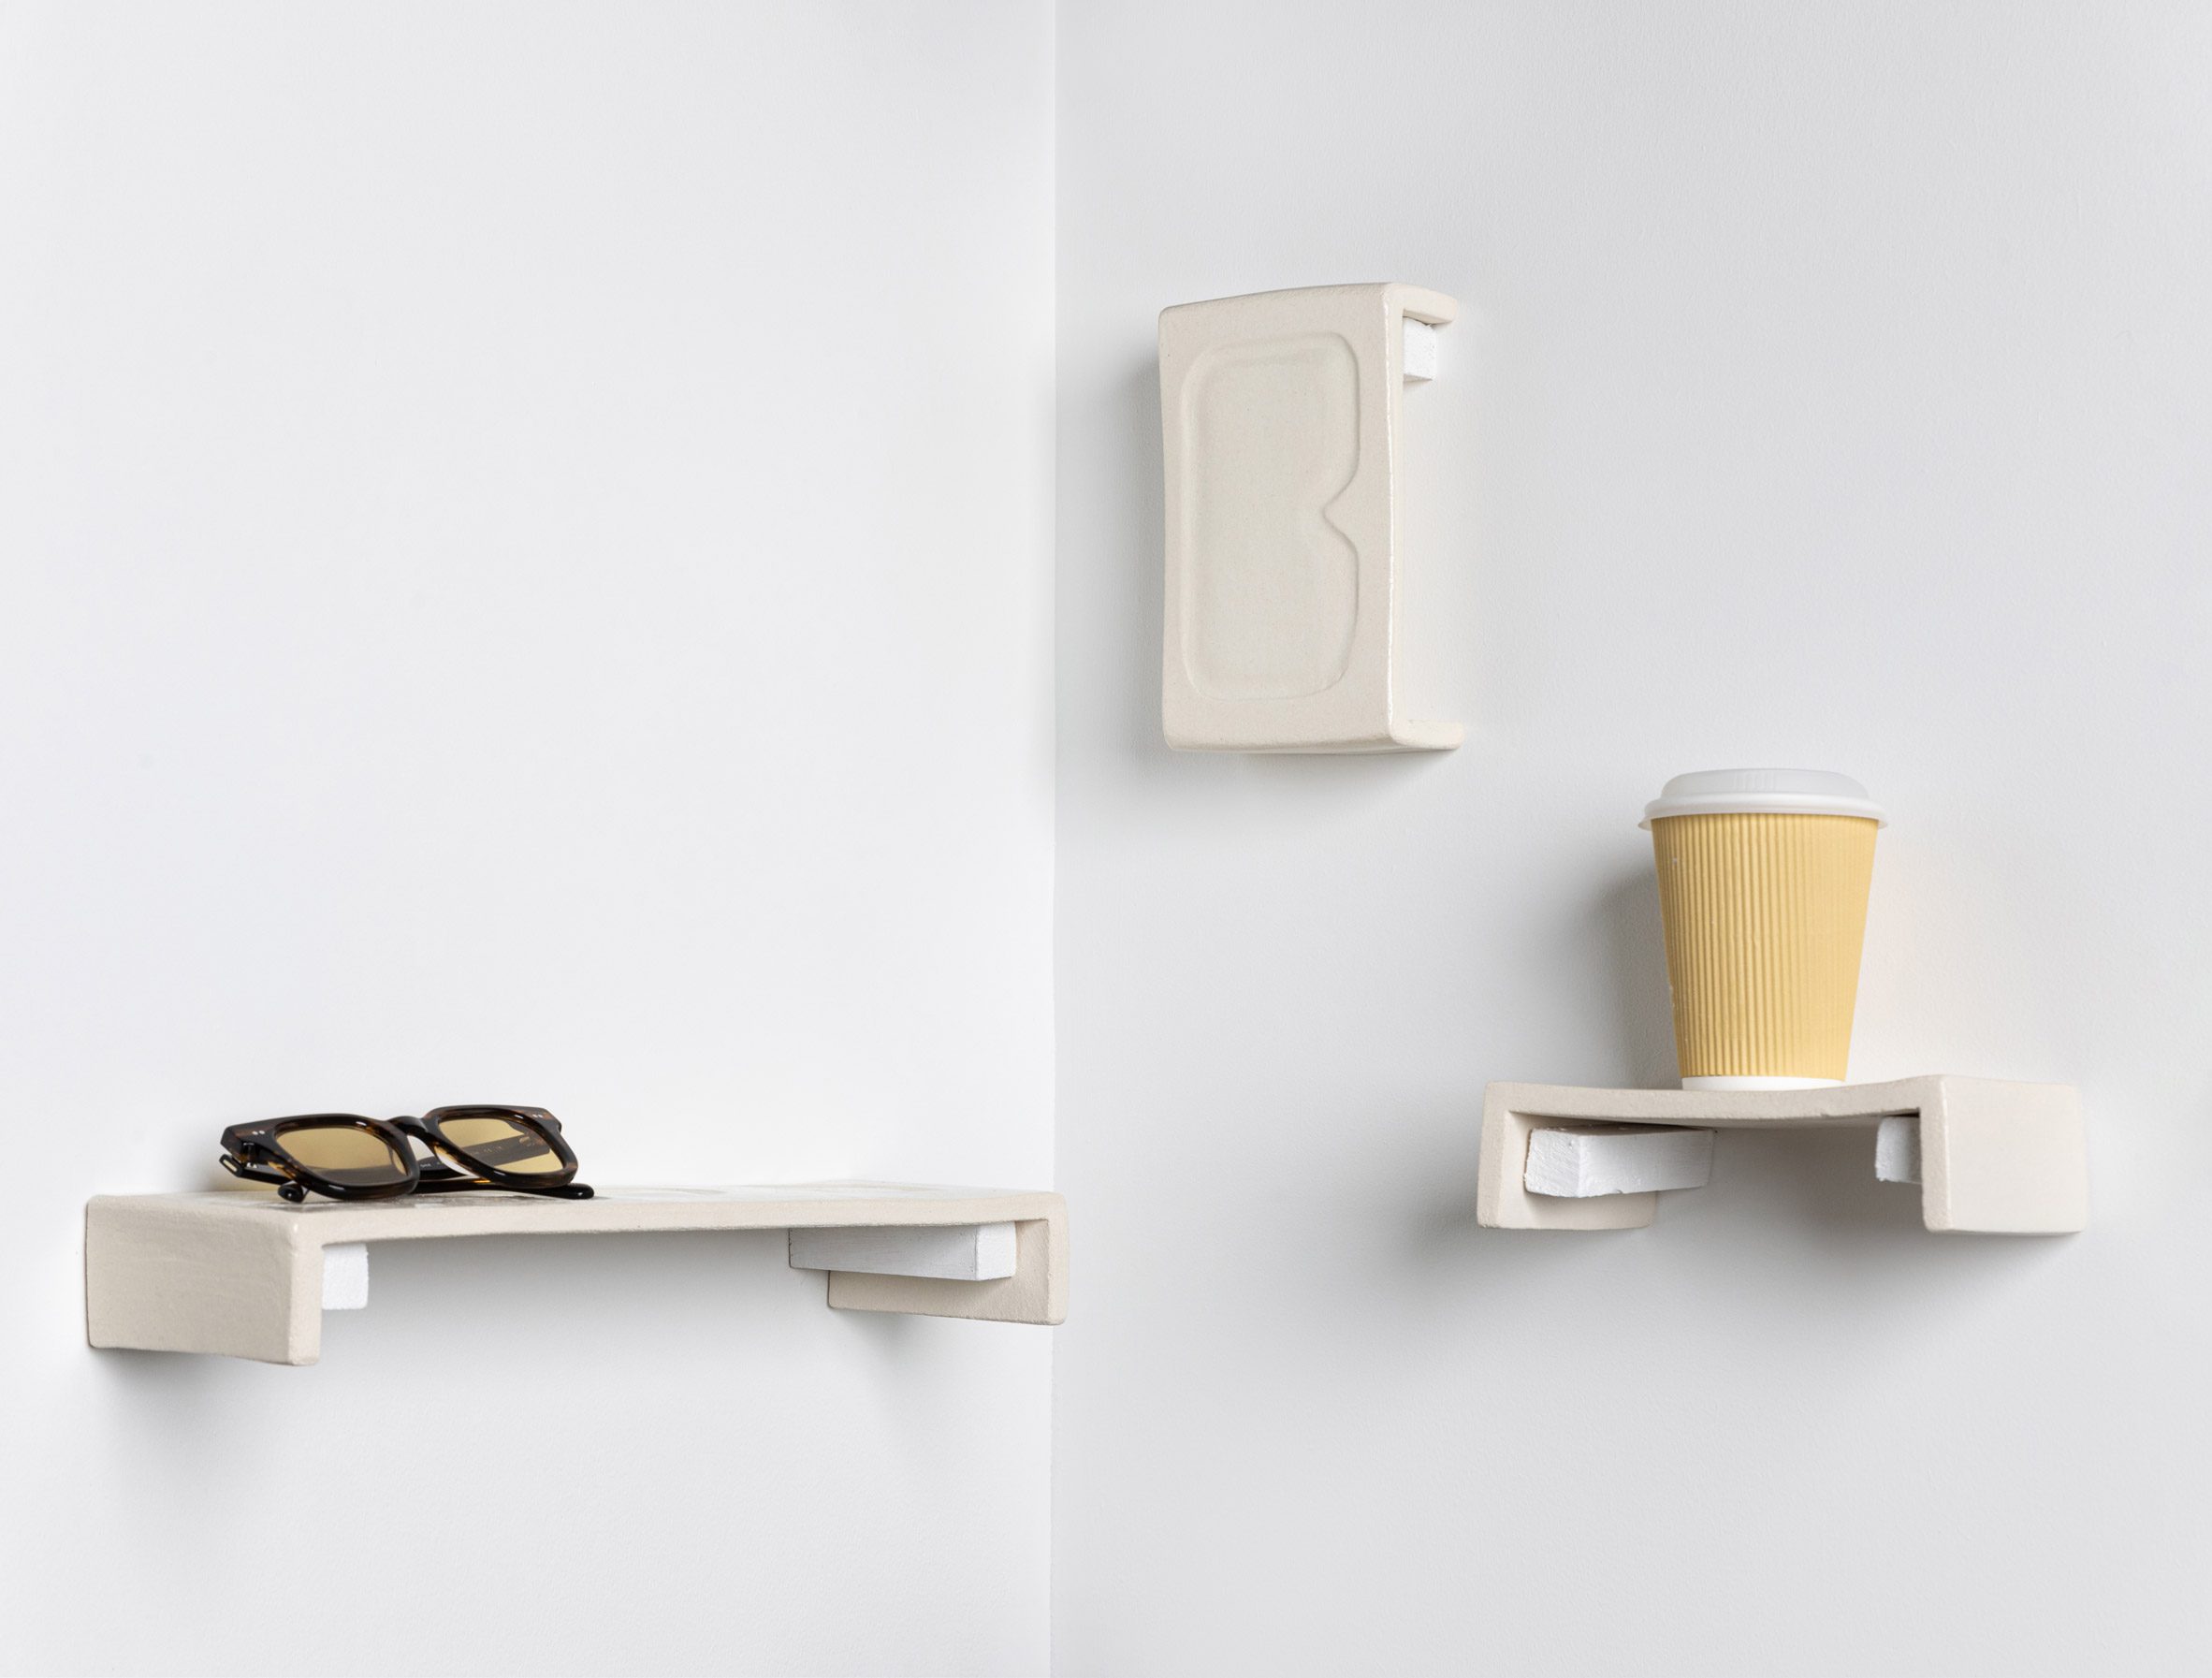 Clay shelving system by Seisei Studio